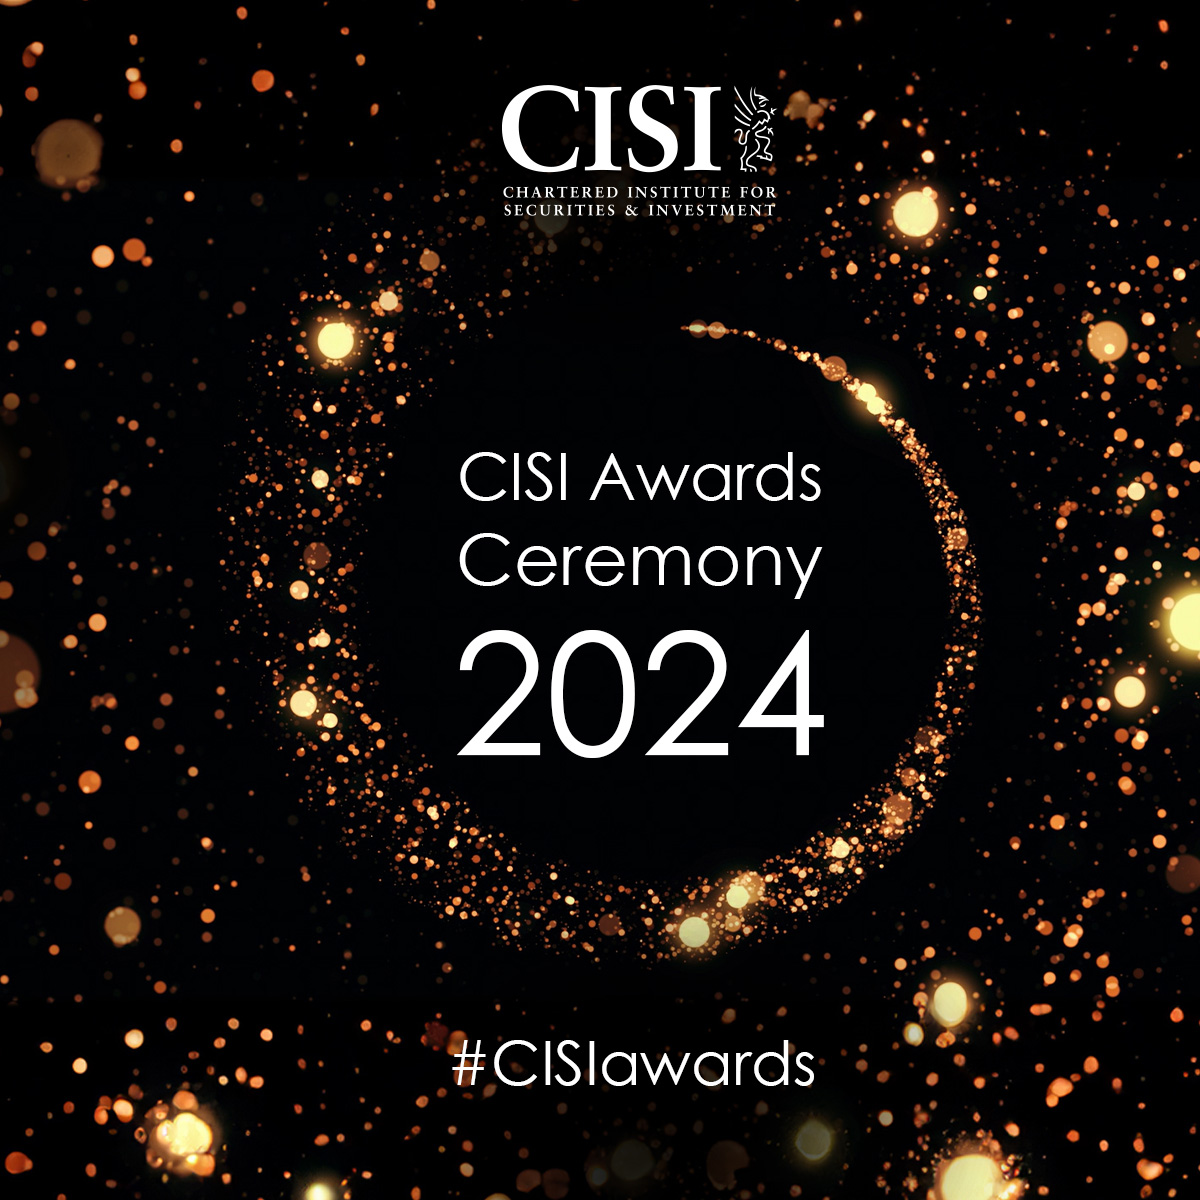 It's our 32nd CISI Awards Ceremony 2024! We look forward to celebrating our award winners. Please join the celebrations online using this link from 16:50 BST, the ceremony starts at 17:00 BST: video.ibm.com/channel/gbT56g… #CISIawards #financialservices #success